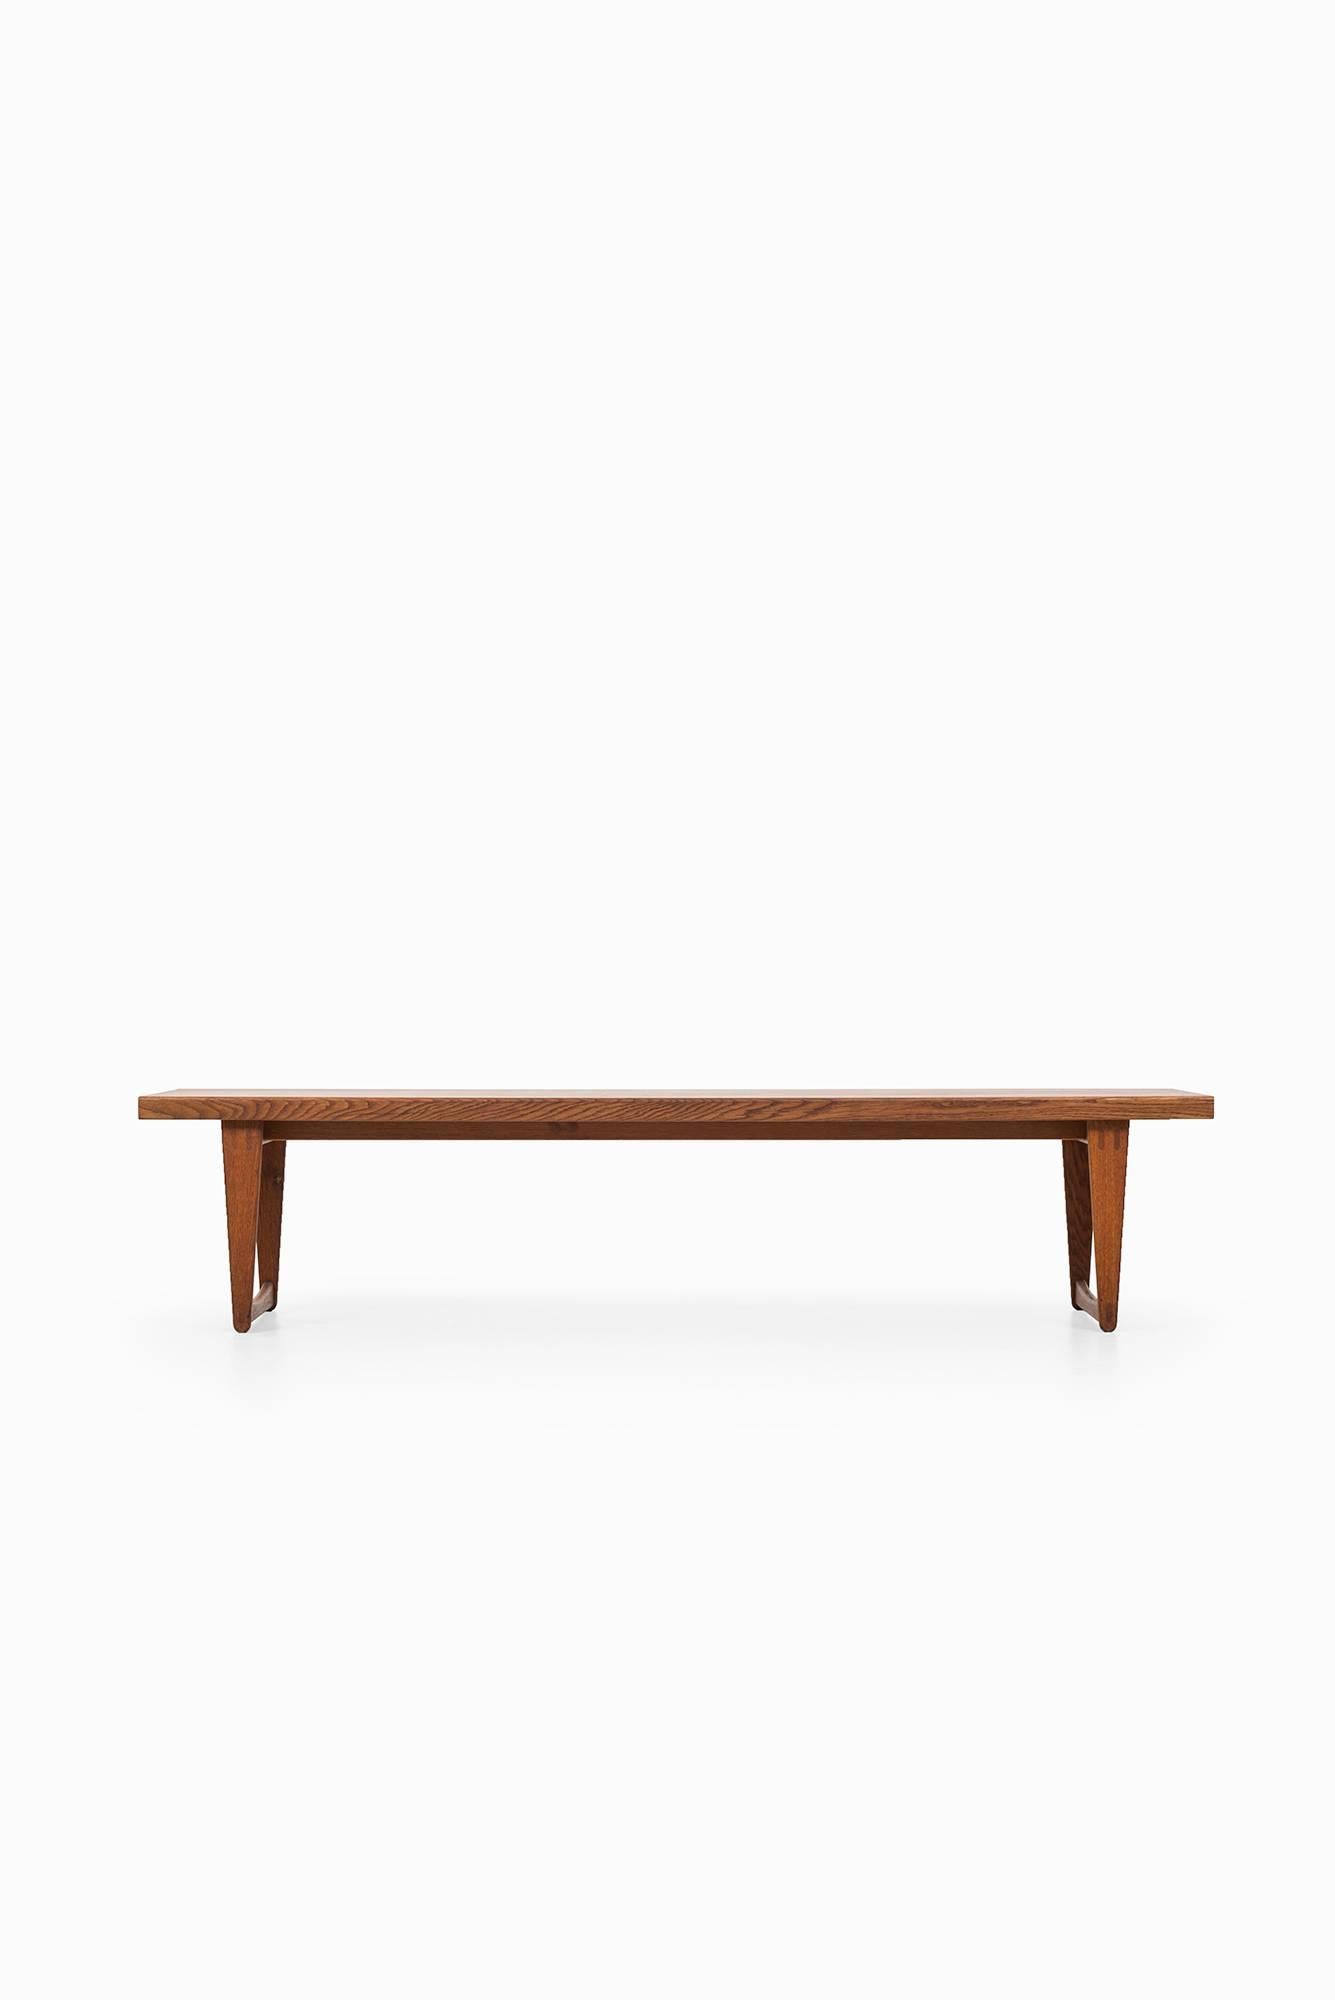 Rare coffee table / side table / bench designed by Yngve Ekström. Produced by Westbergs in Tranås, Sweden.